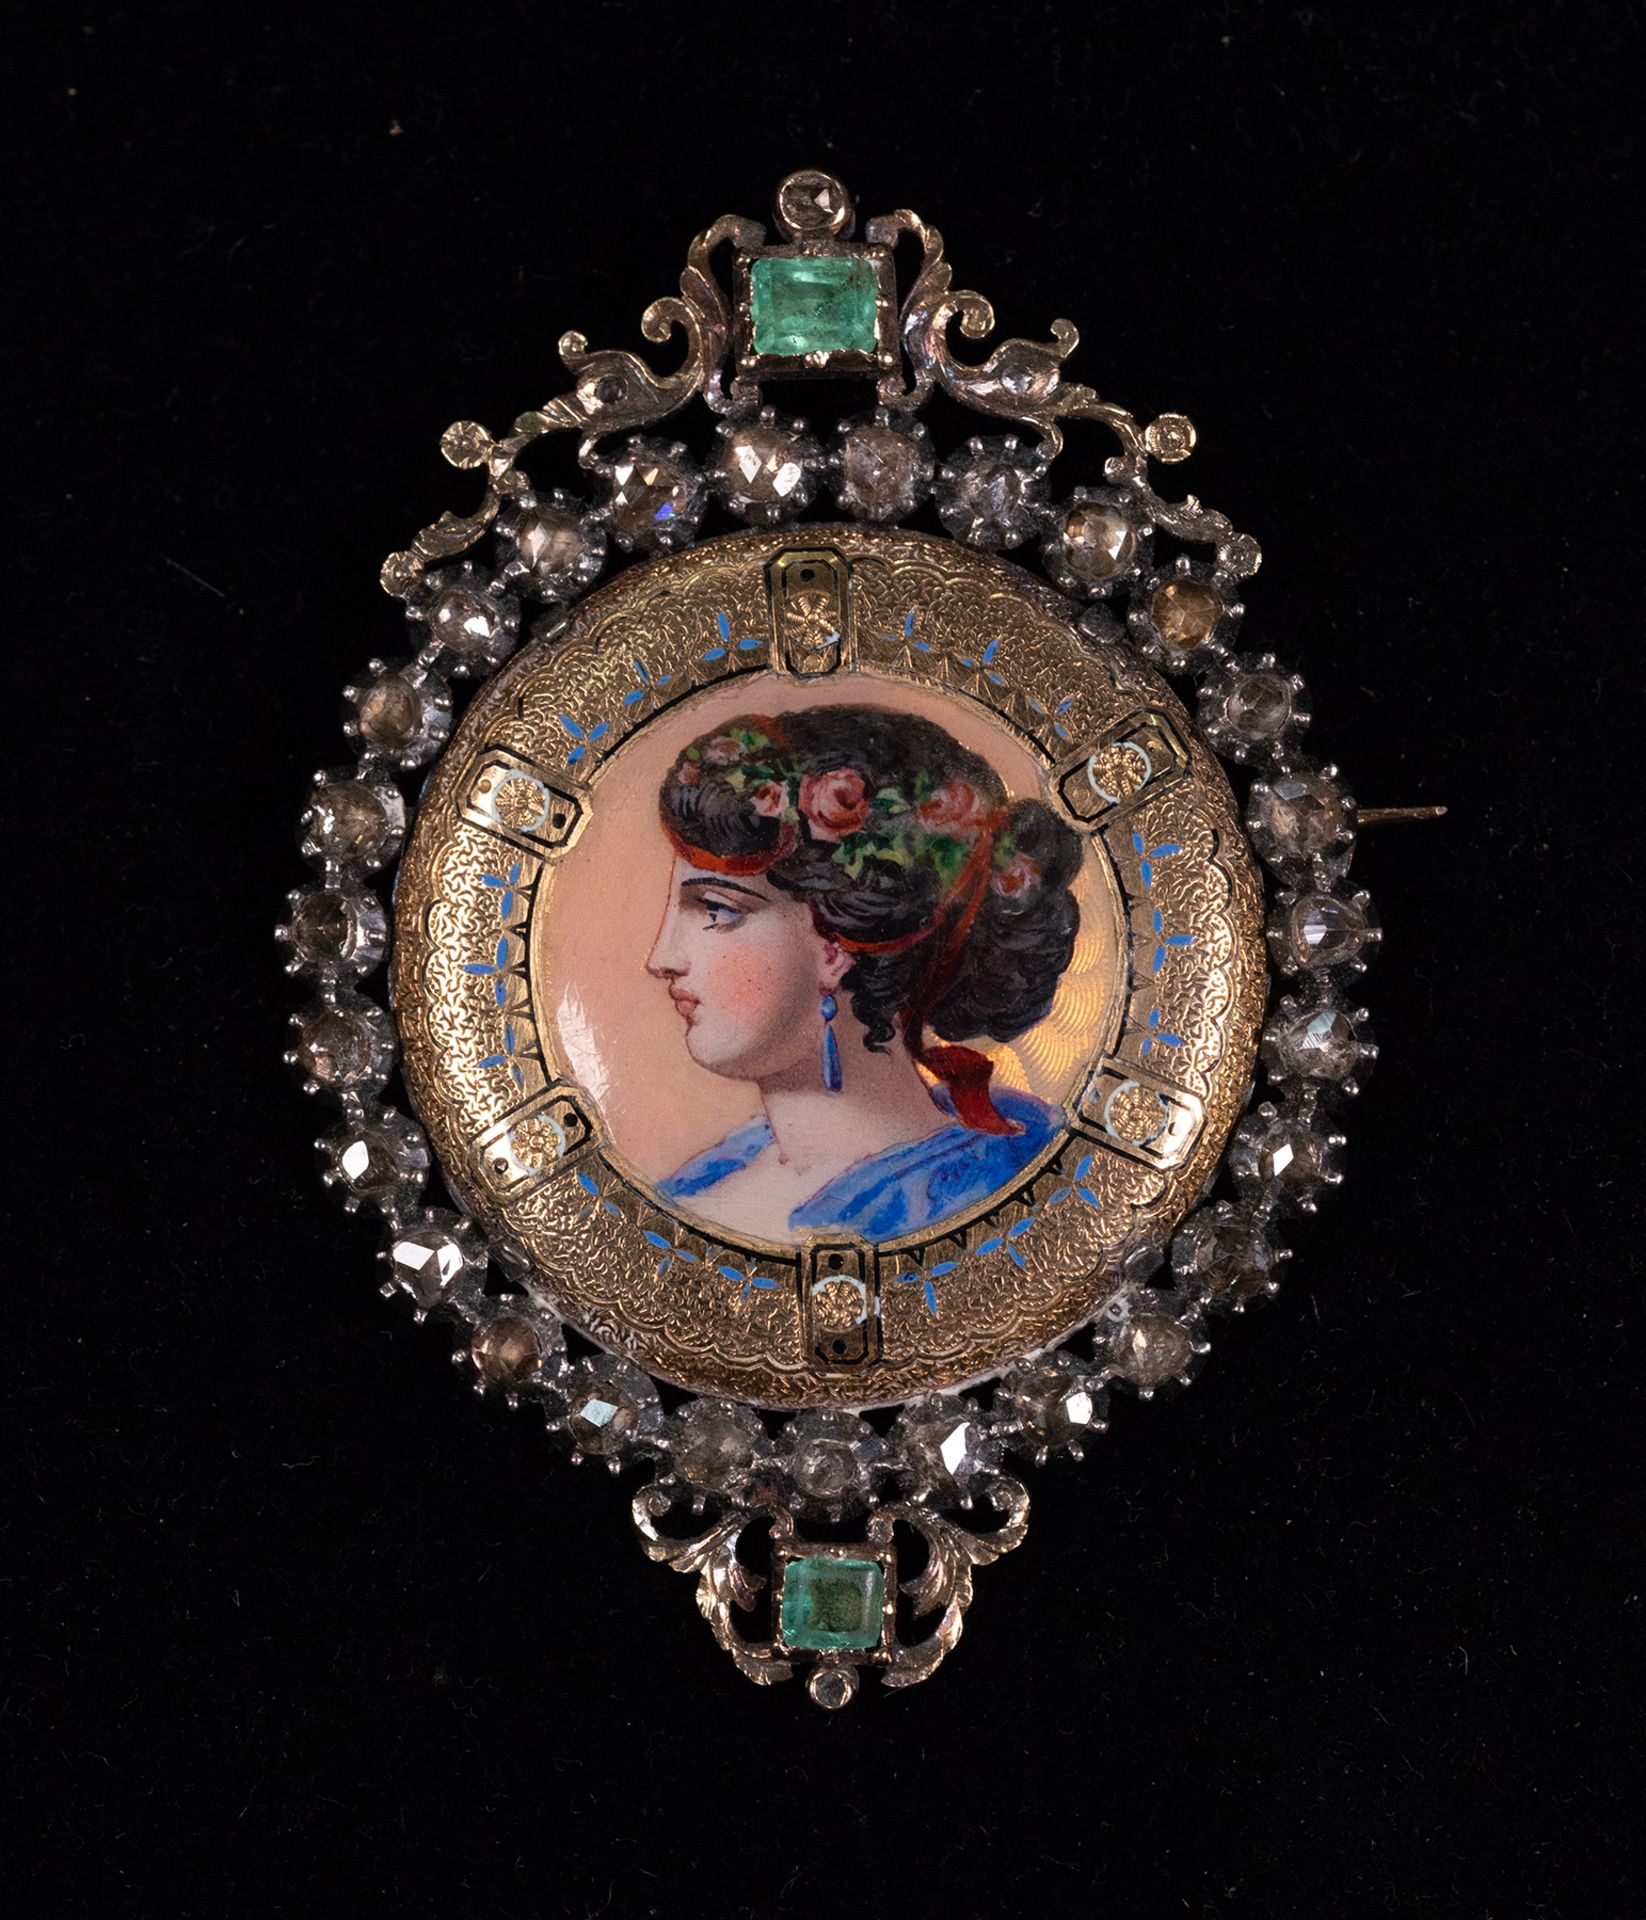 18-karat gold and enamel brooch, set with diamonds and emeralds